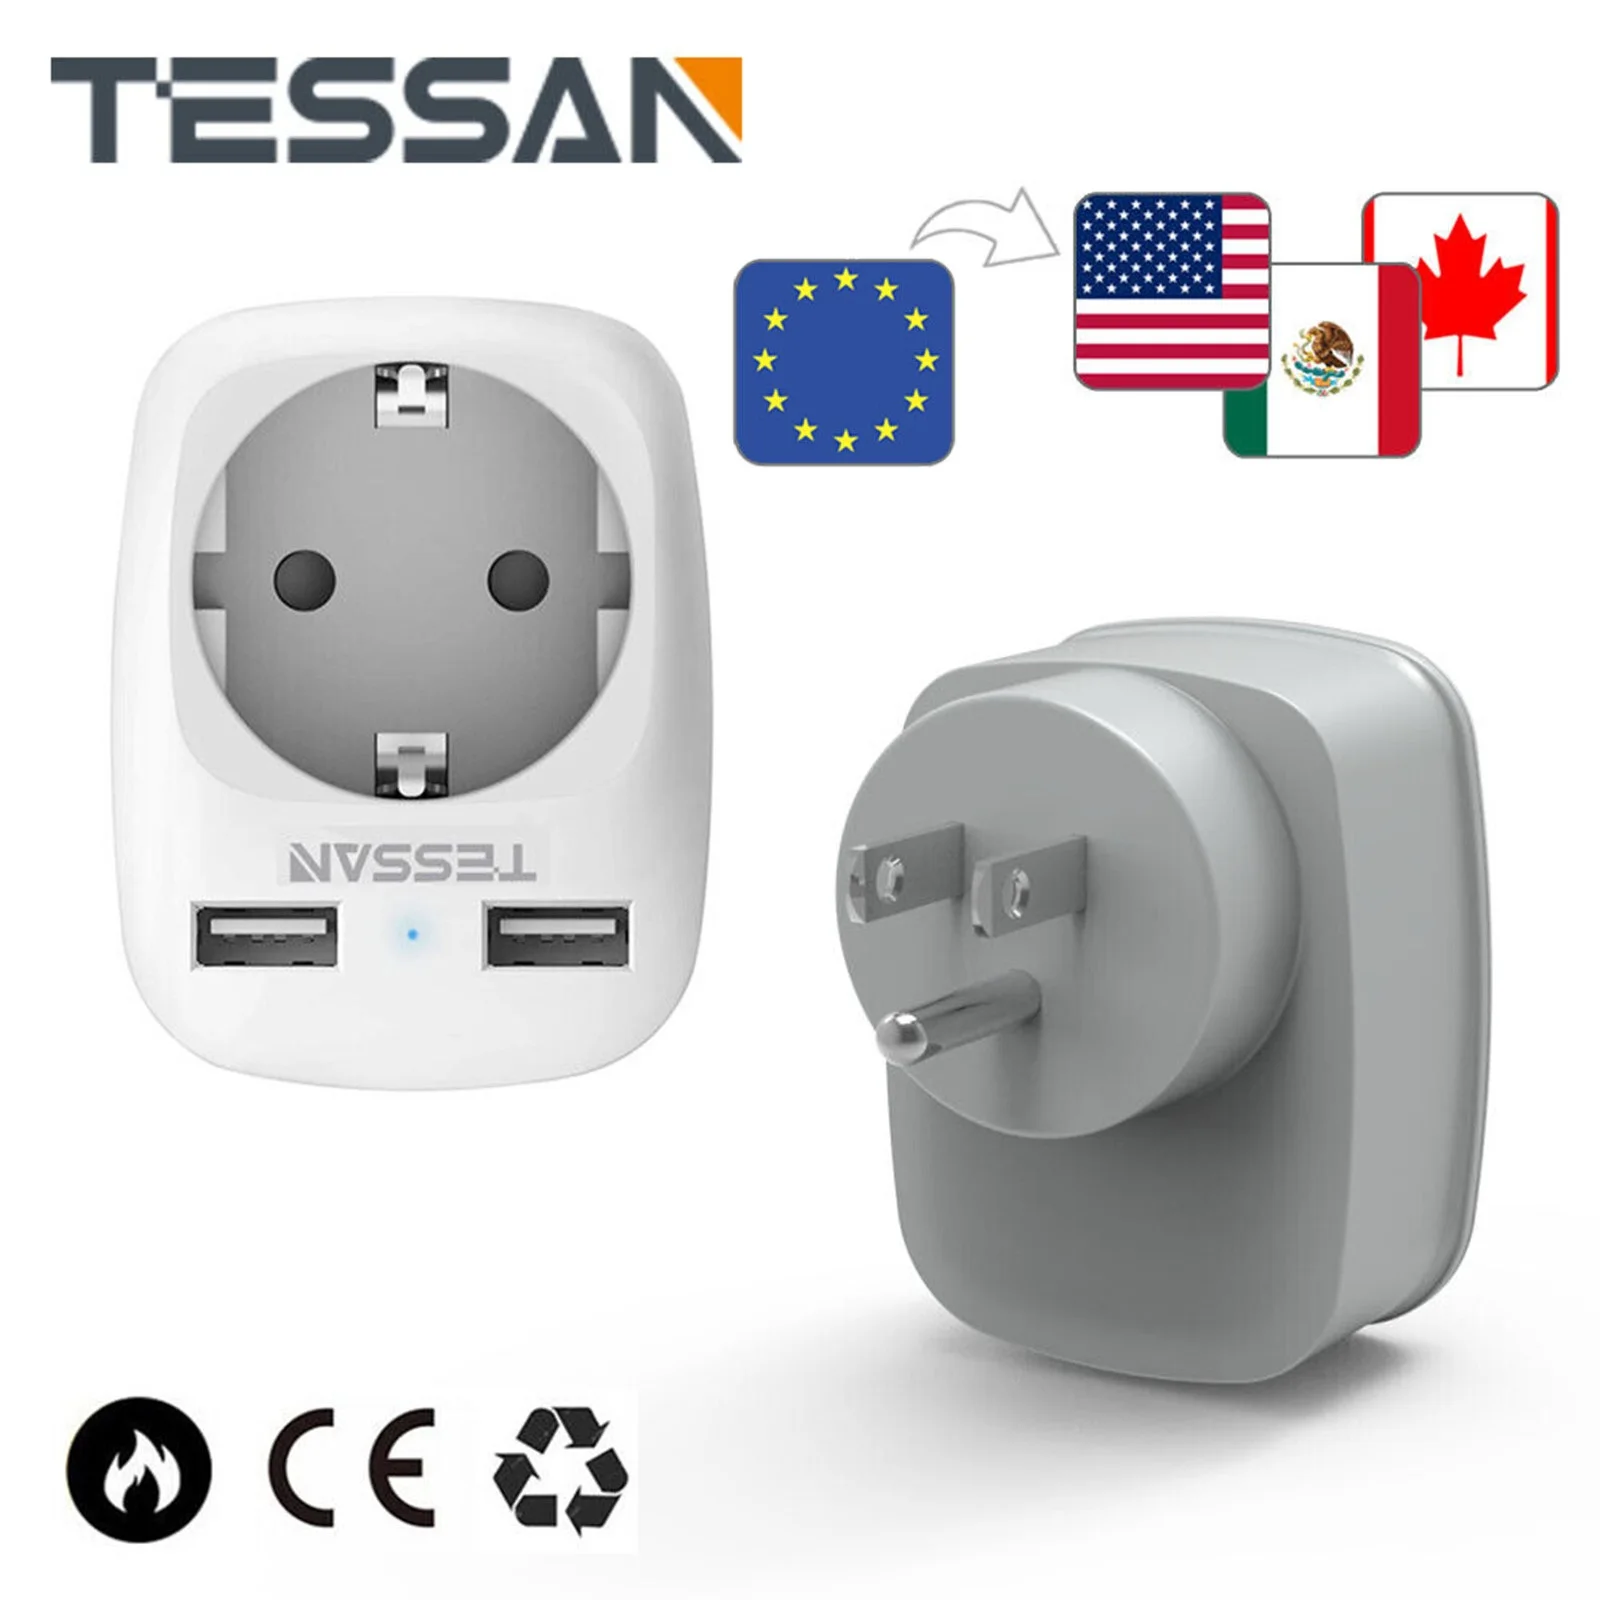 TESSAN Travel Adapter European to American Adapter with 2 USB 2.4A, Socket Adapter Travel Plug Power Adapter for Canada Mexico